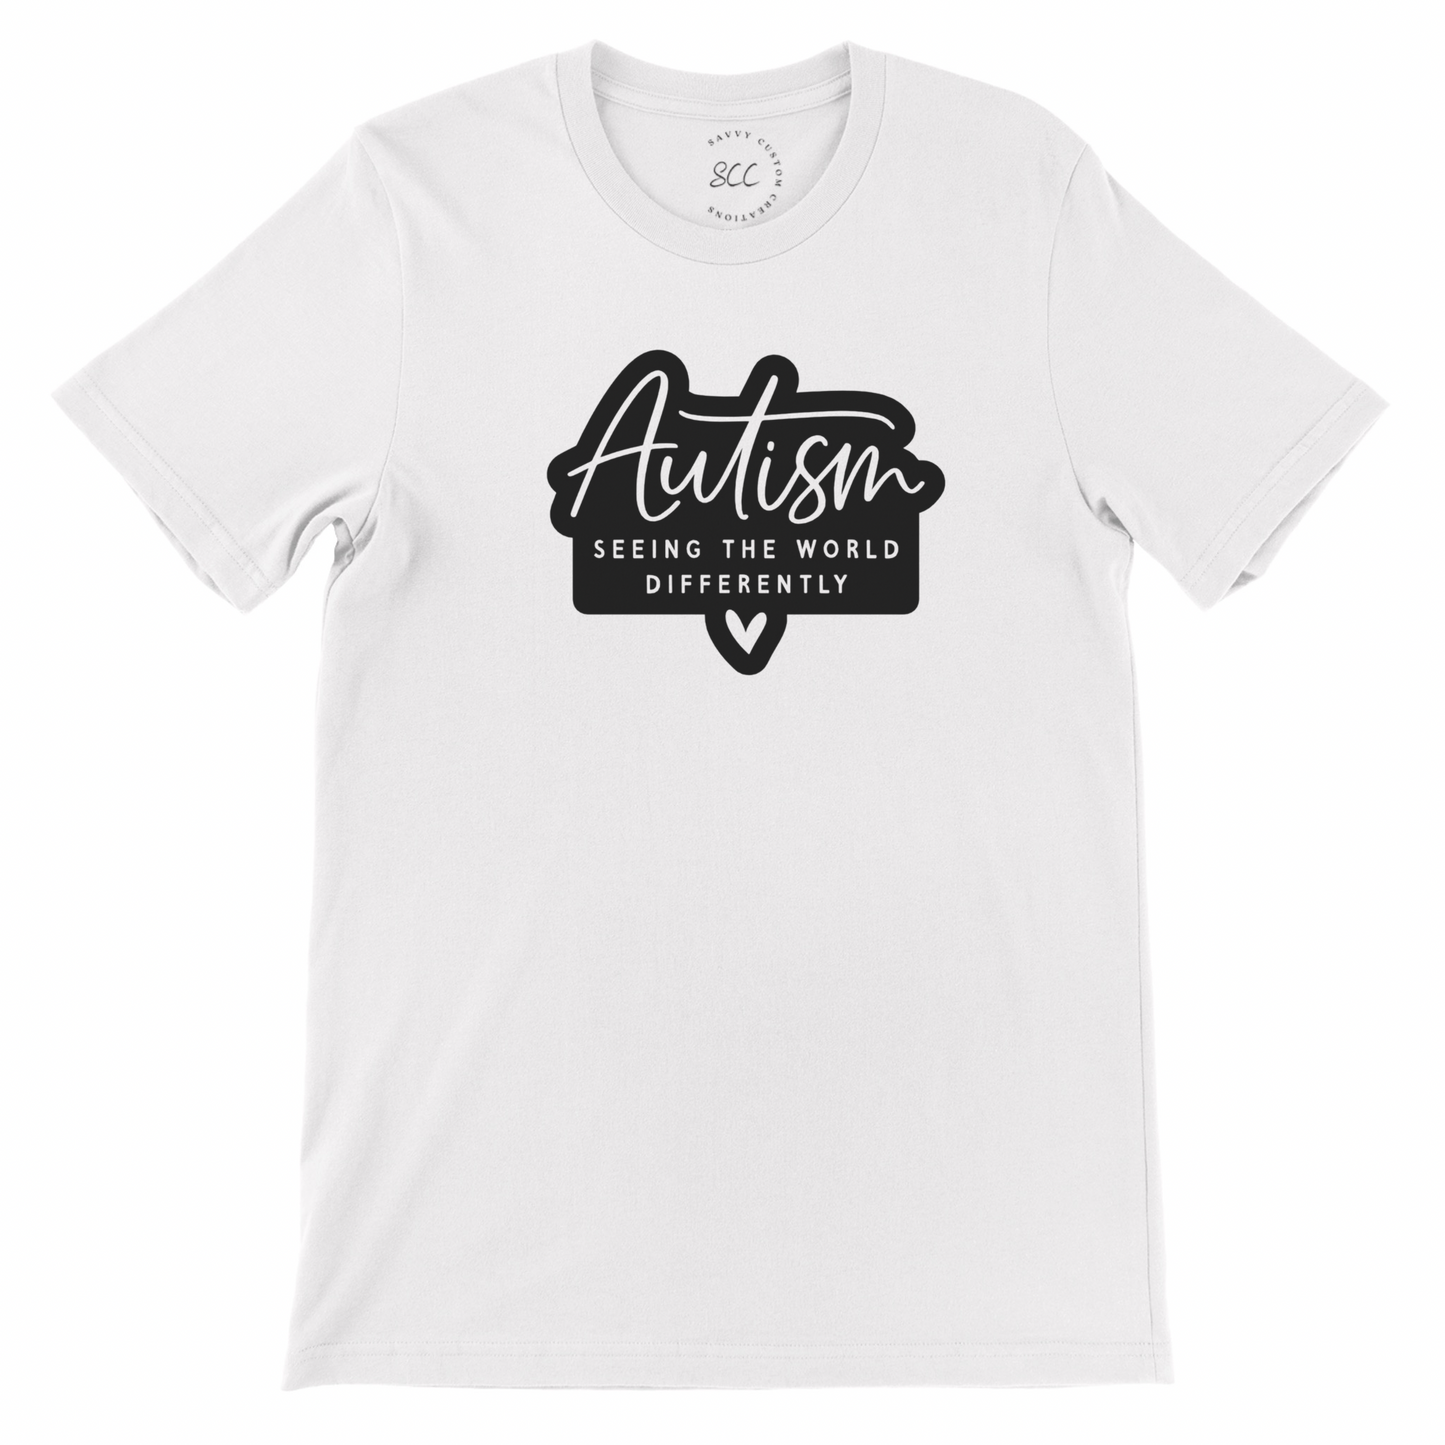 AUTISM SEEING THE WORLD DIFFERENTLY (Black Font) - Unisex crewneck T-shirt